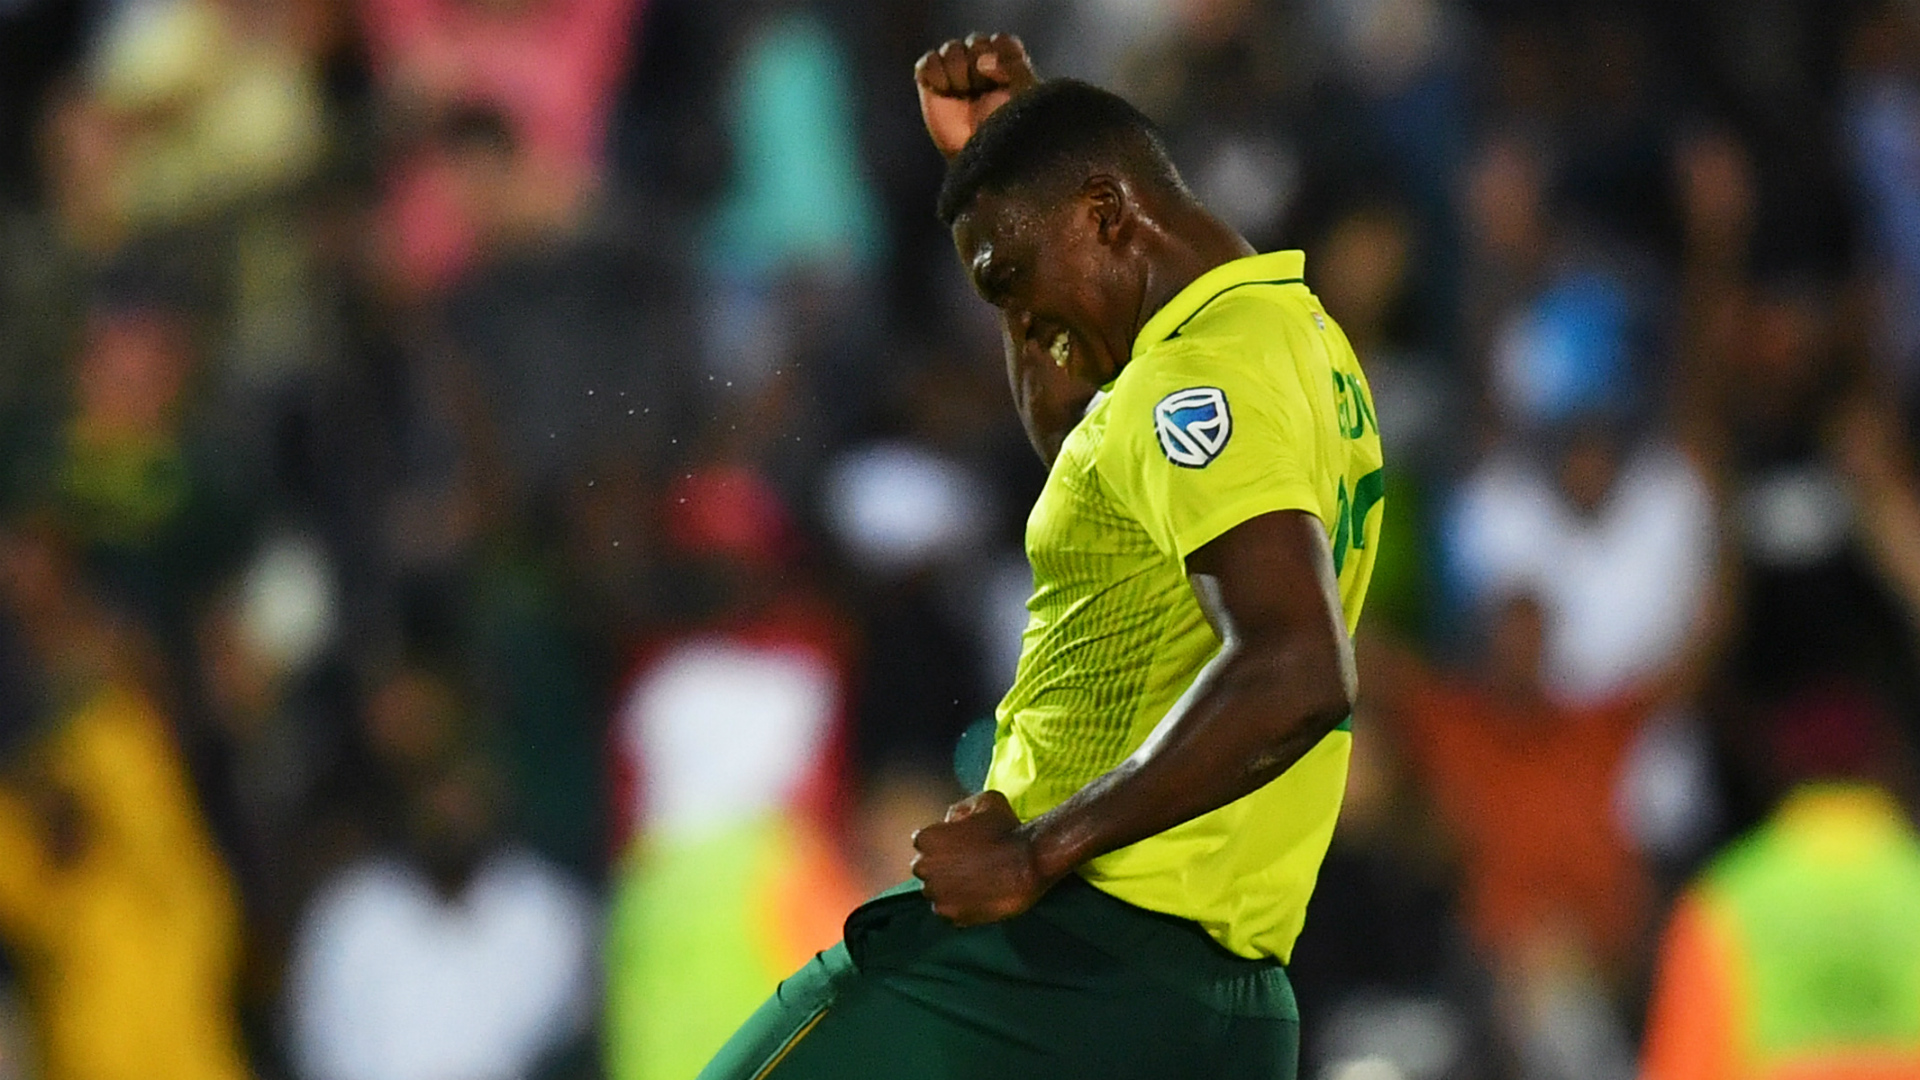 England needed seven runs from seven balls but they could not get over the line in a remarkable ending to their T20 match with South Africa.